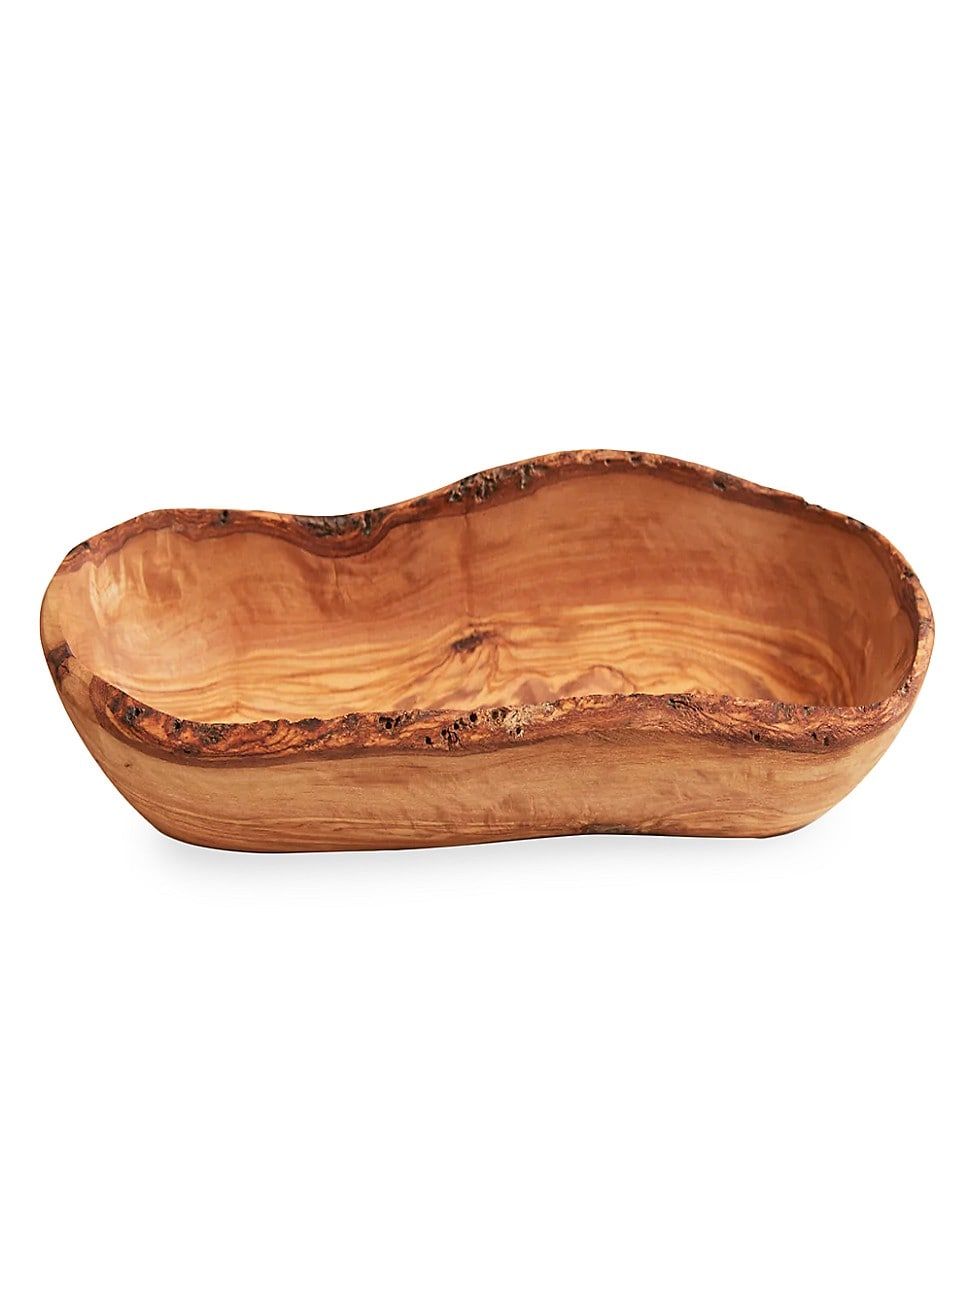 Italian Olivewood Boat Shaped Bowl with Live Edges | Saks Fifth Avenue